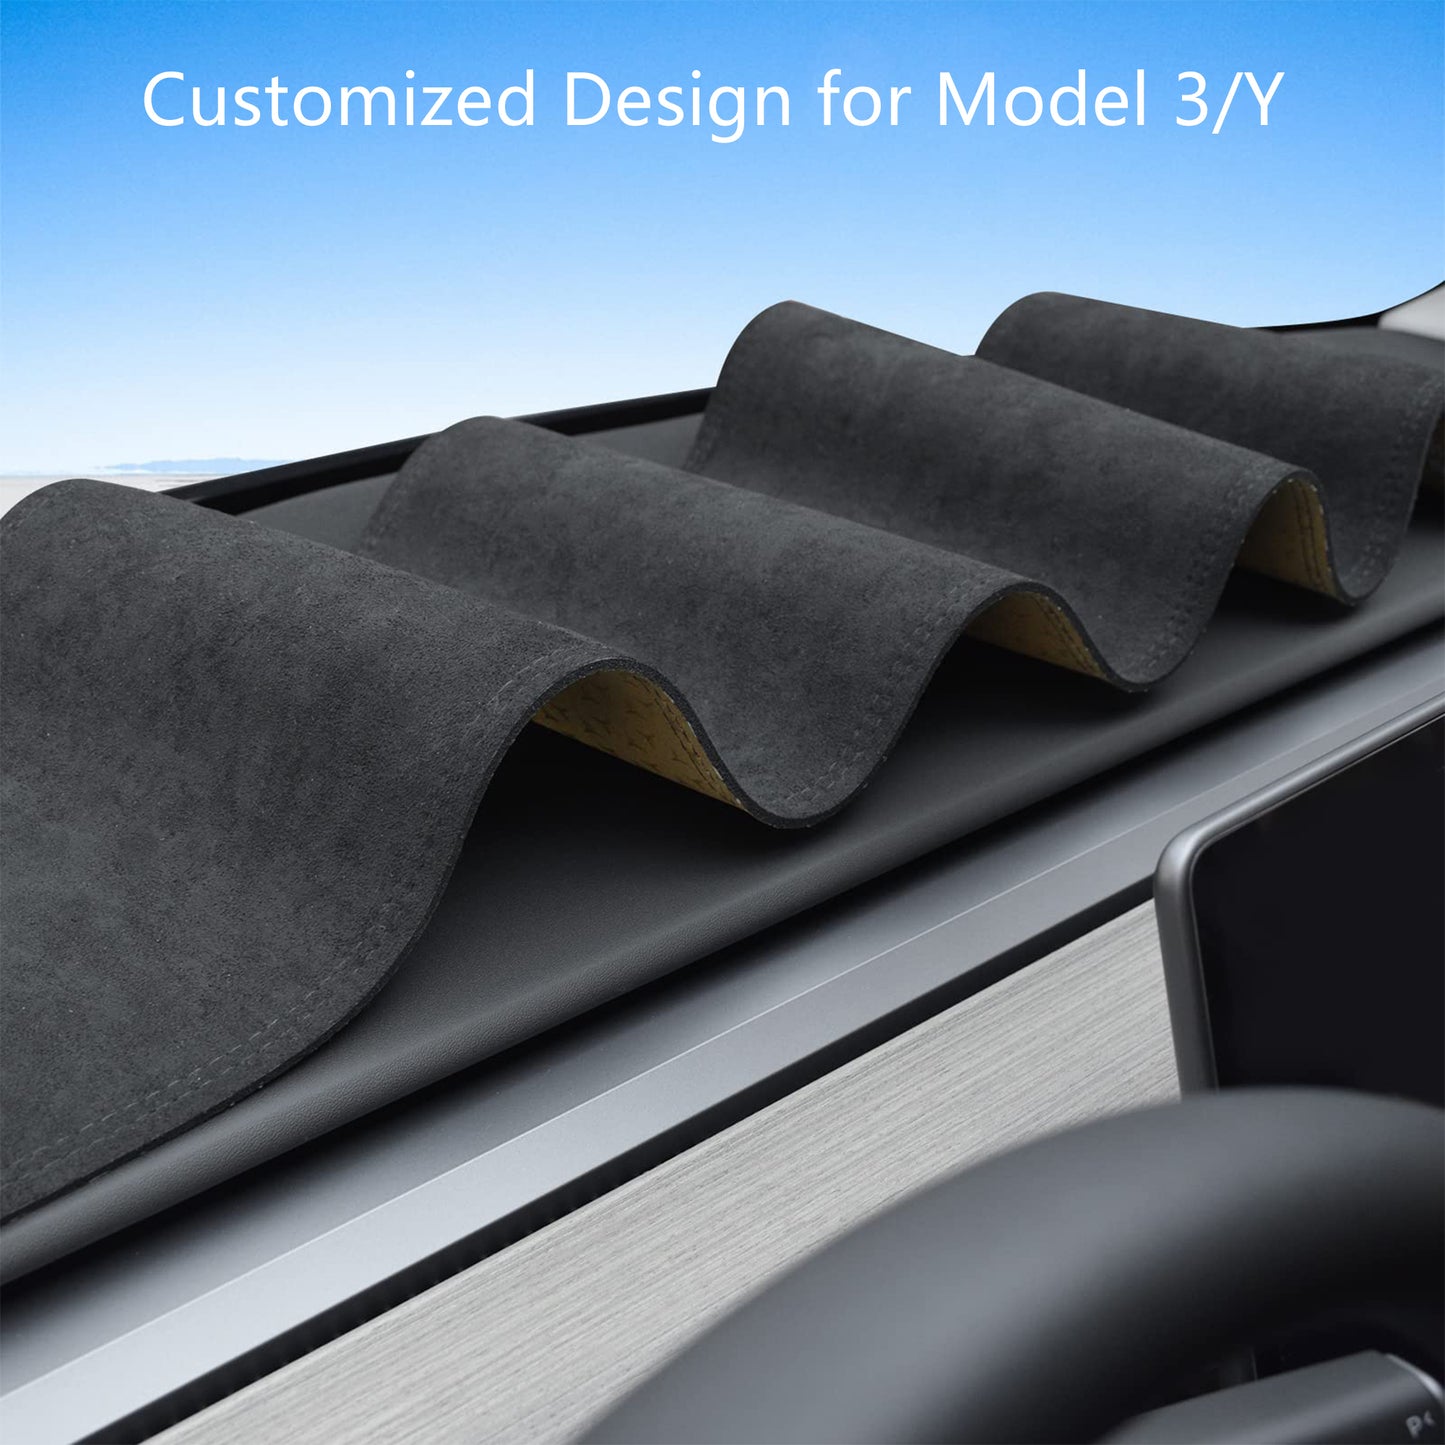 tesla model 3 Y dashboard cushion protection decorative pad light proof car 2022 2023 2021 2020 2019 2018 arcoche accessories accessory aftermarket price Vehicles standard long range performance sr+ electric car rwd ev interior exterior diy decoration price elon musk must have black white red blue 5 7 seats seat